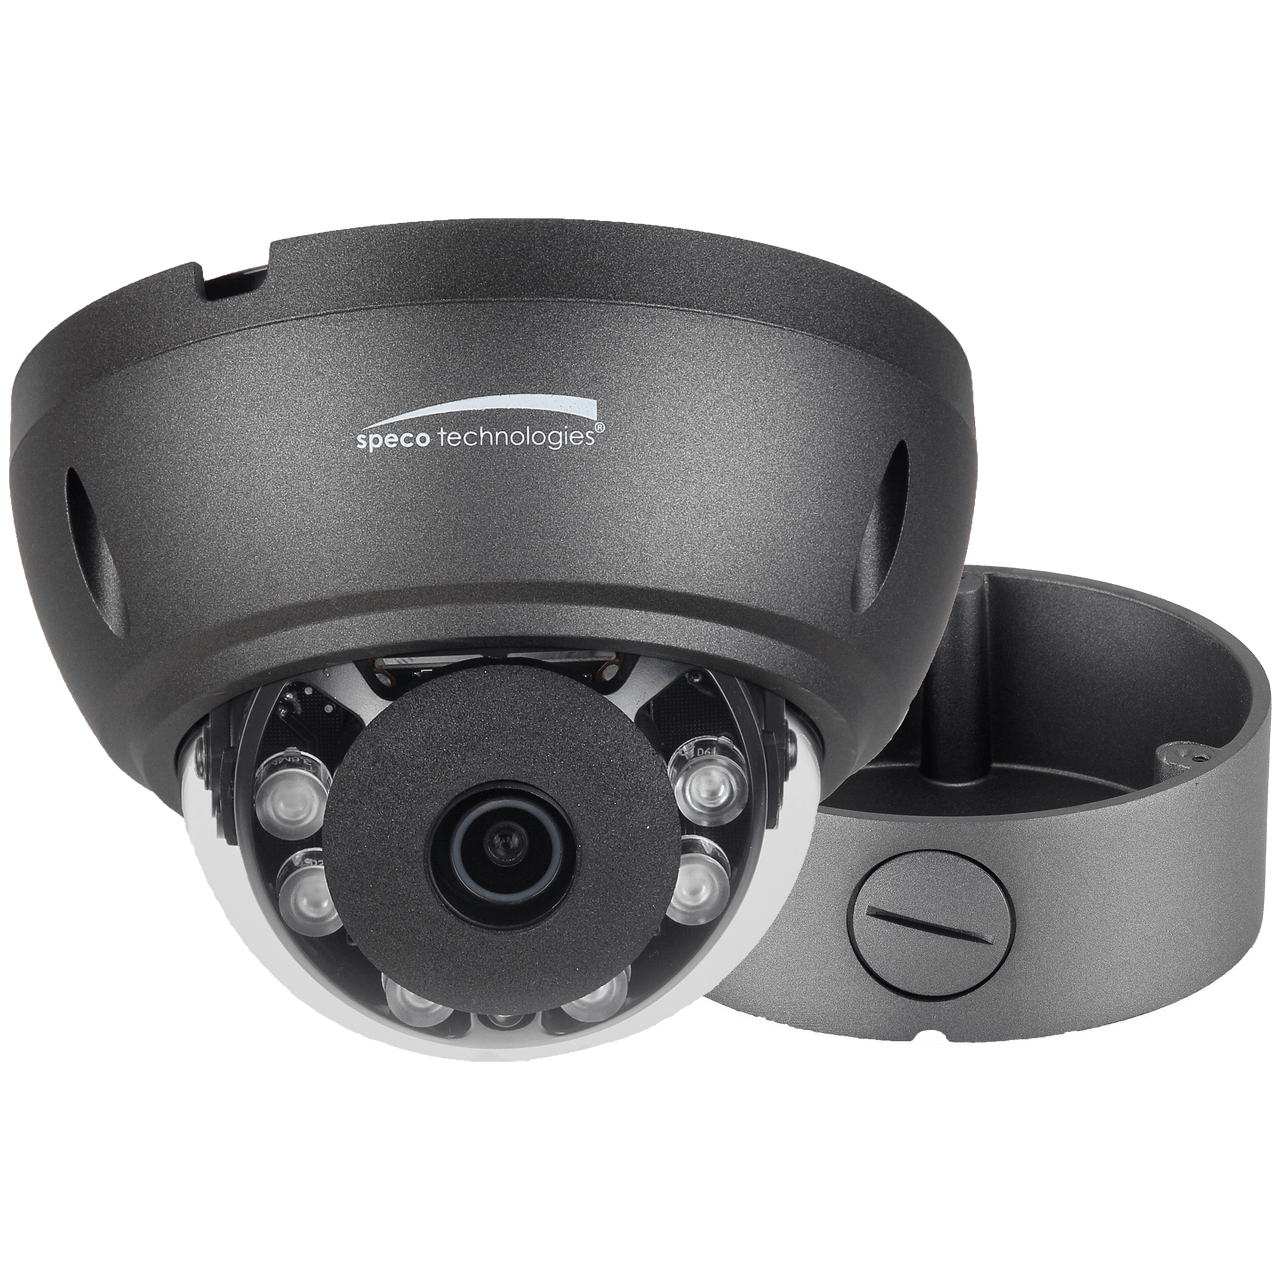 Speco Technologies SPE-HTD5TG 5MP HD-TVI Dome, IR, 2.8mm lens, Grey housing, Included Junc Box, TAA (SPE-HTD5TG)